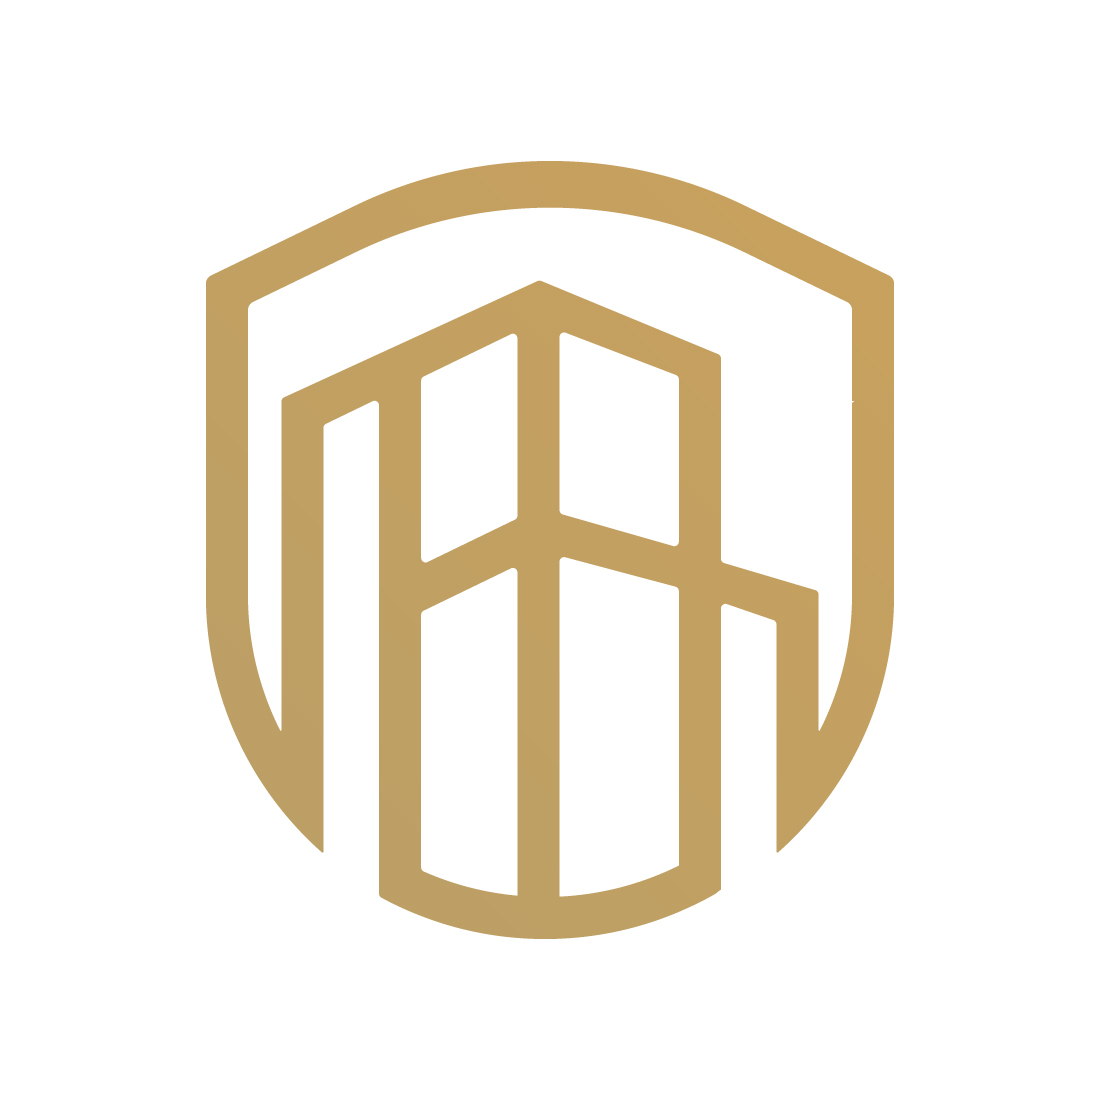 Luxury Real Estate logo design template arts Luxury property logo design vector images Real Estate Business logo monogram best icon preview image.